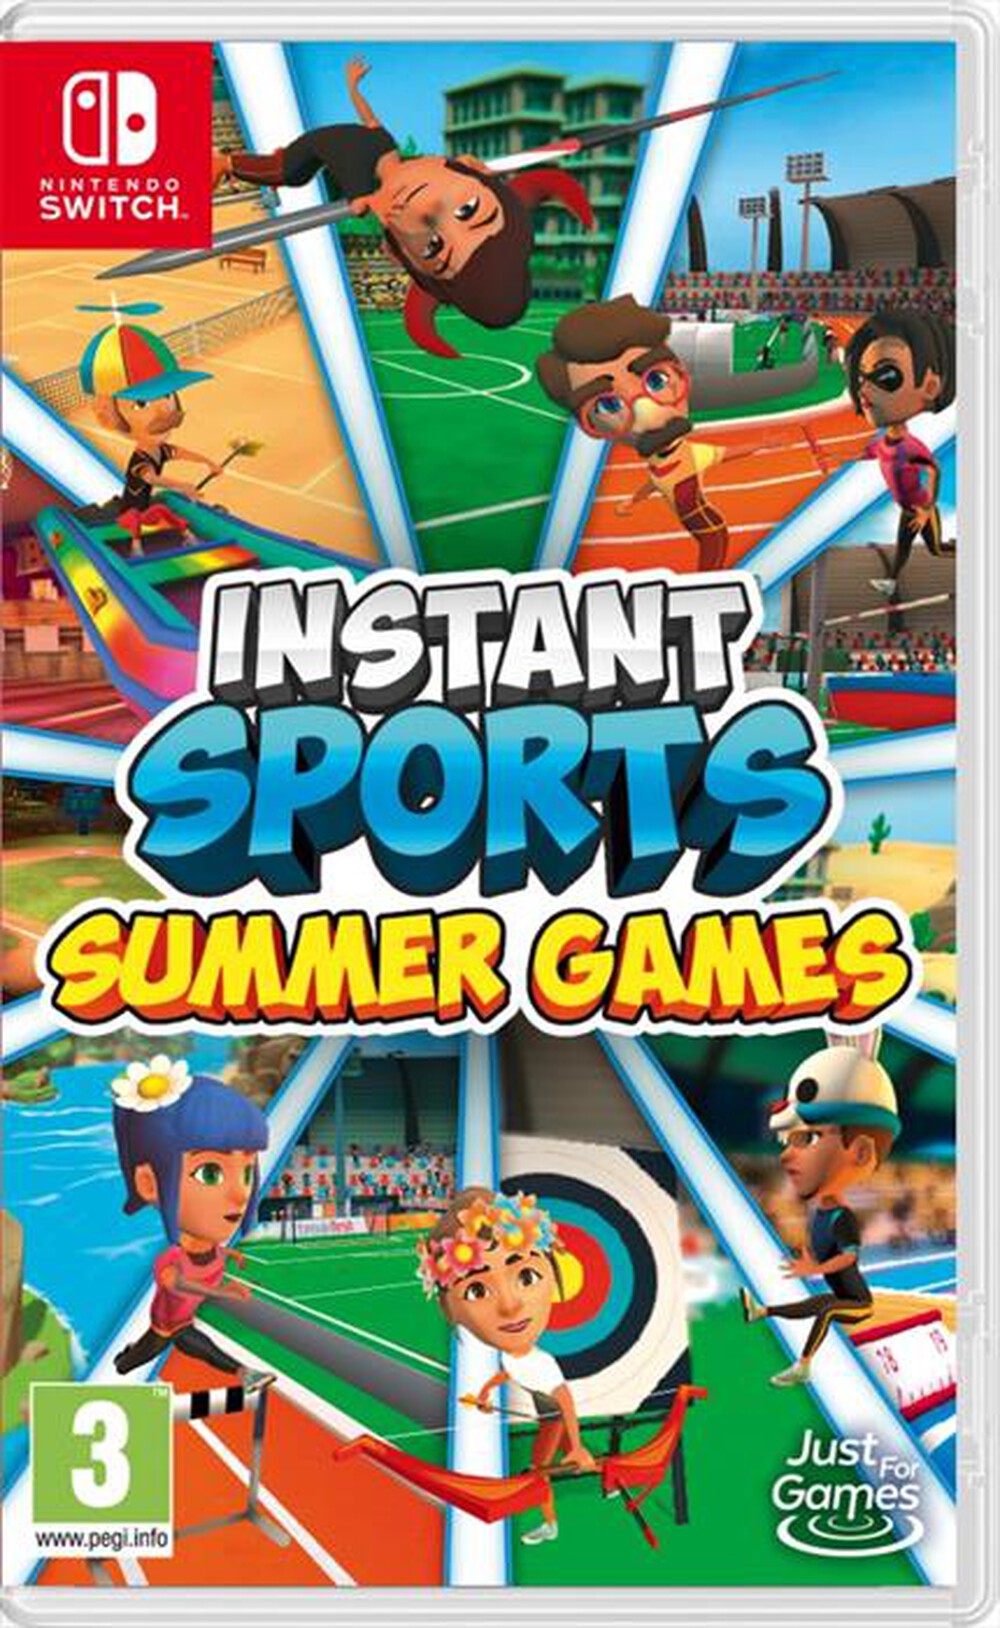 "JUST FOR GAMES - INSTANT SPORTS - SUMMER GAMES SWT"